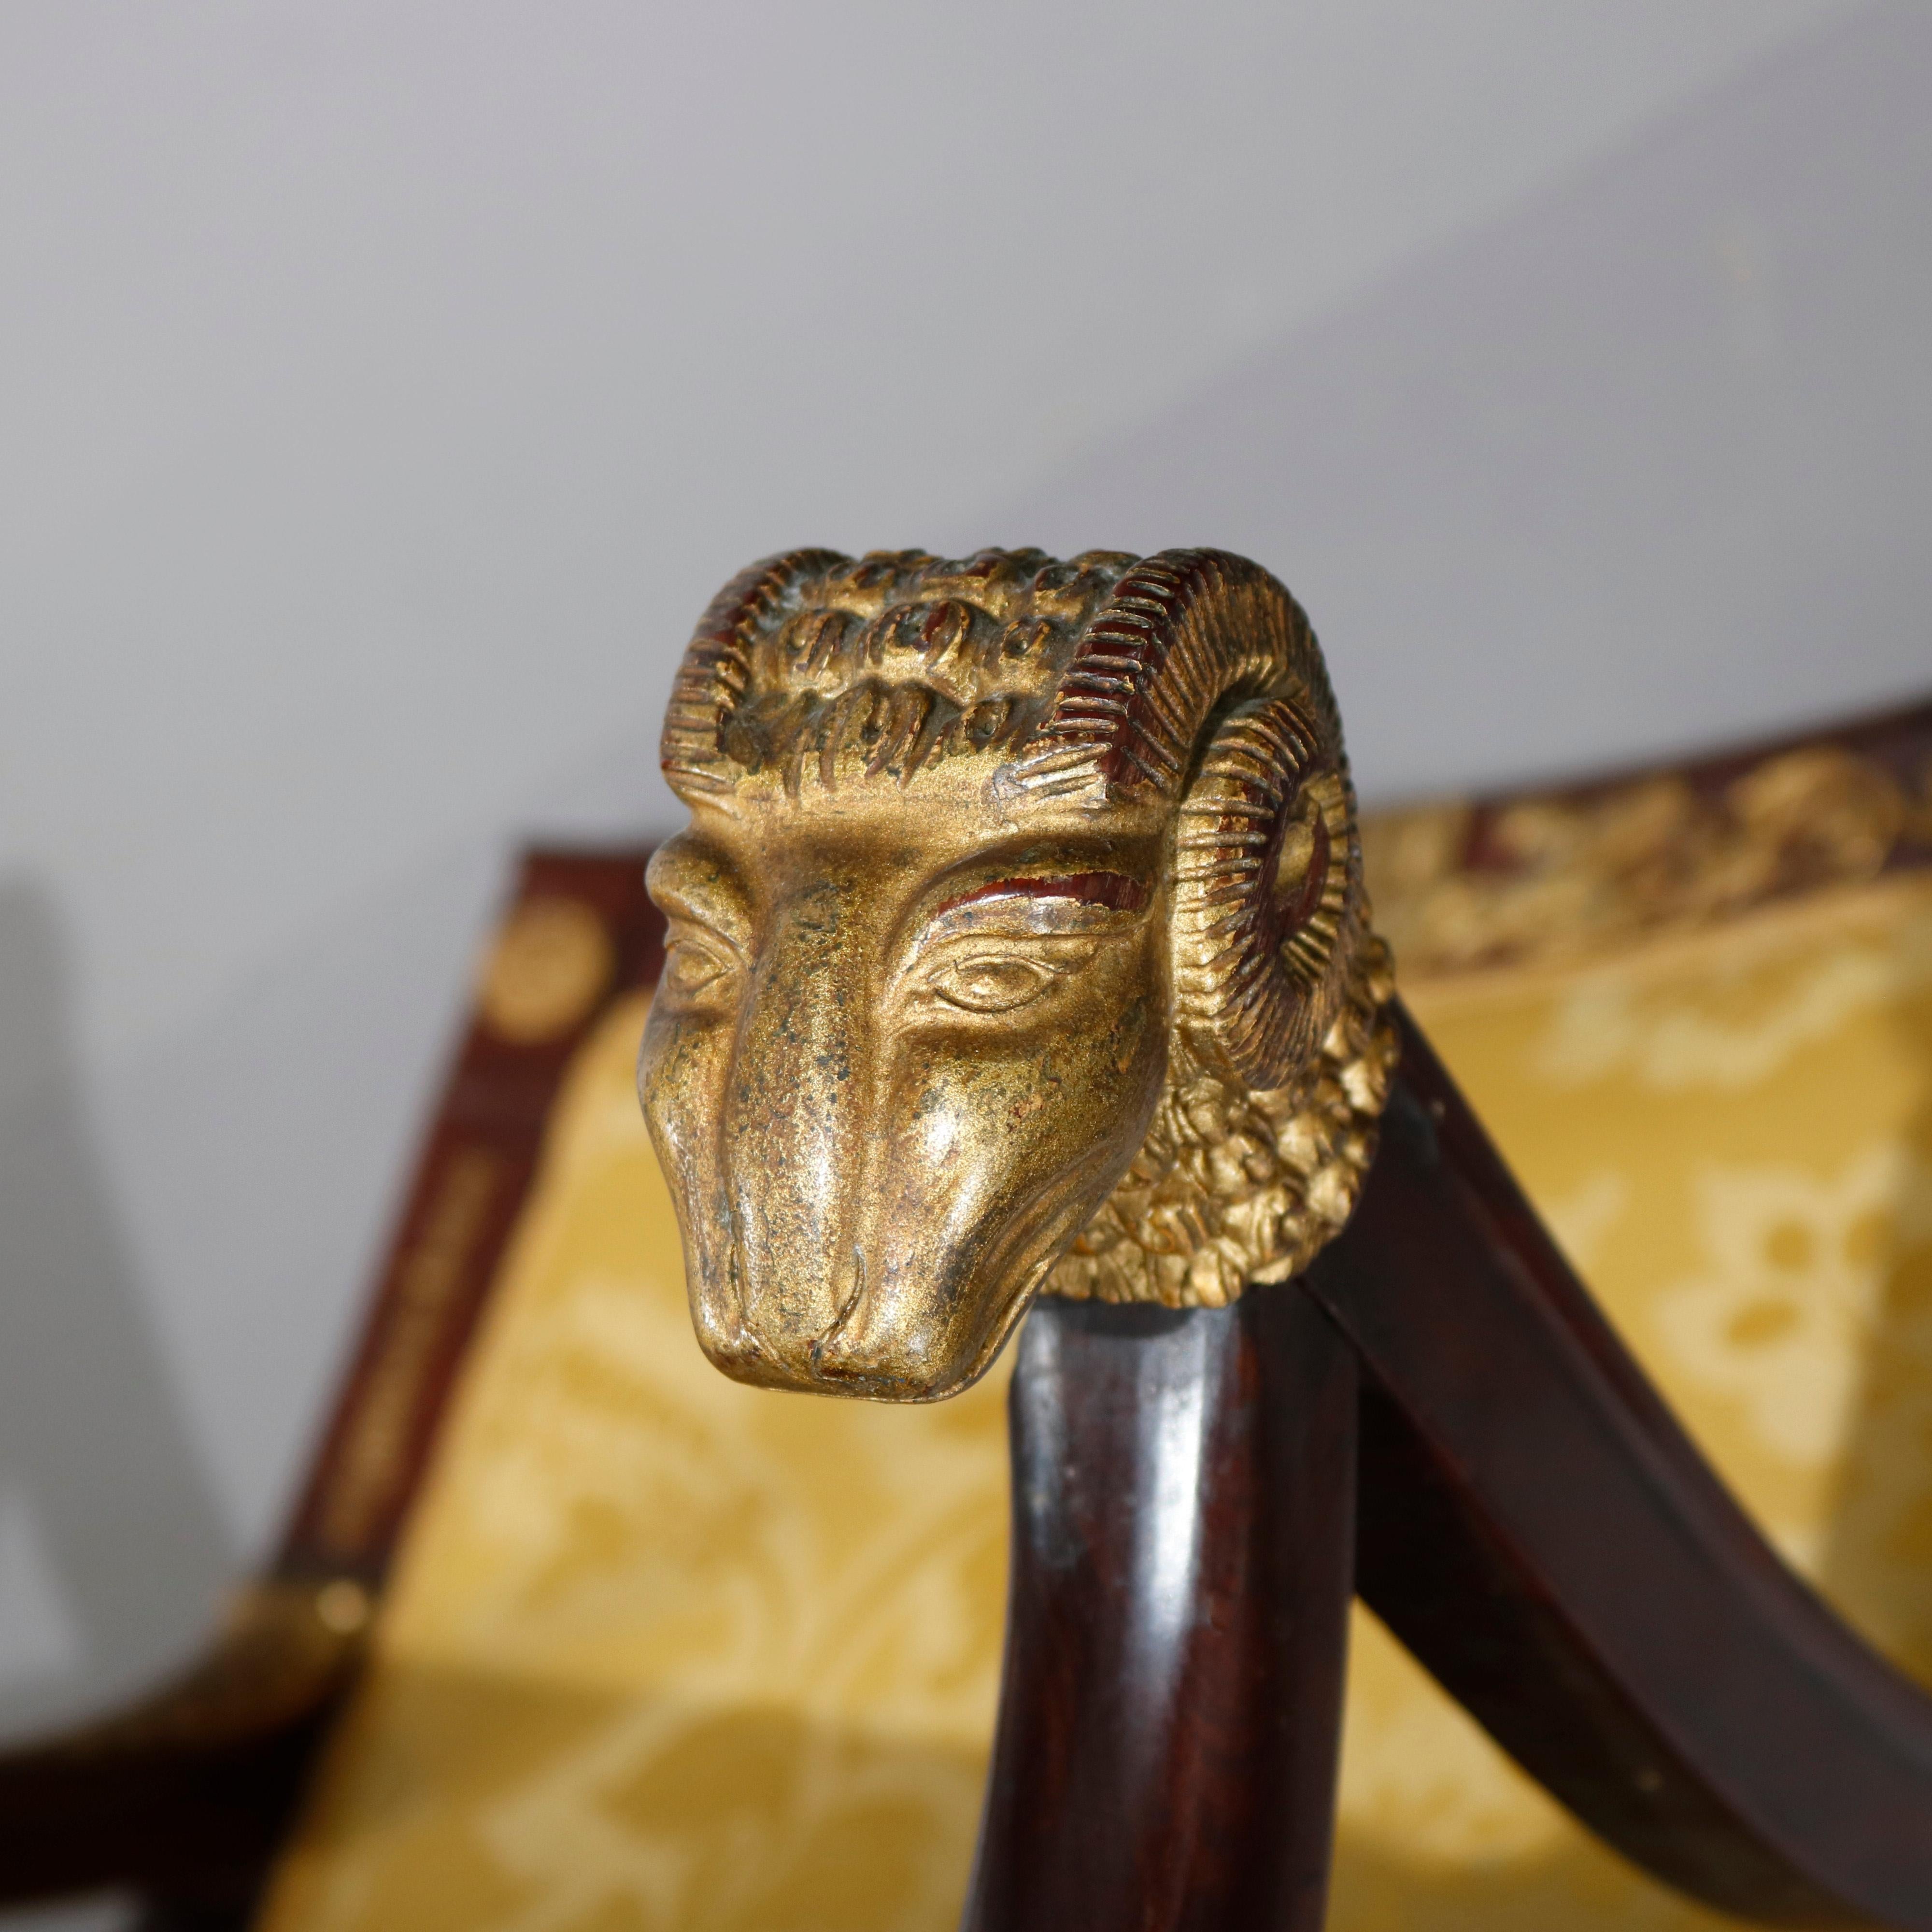 Cast Antique French Empire Figural Ormolu and Mahogany Armchair with Ram Heads